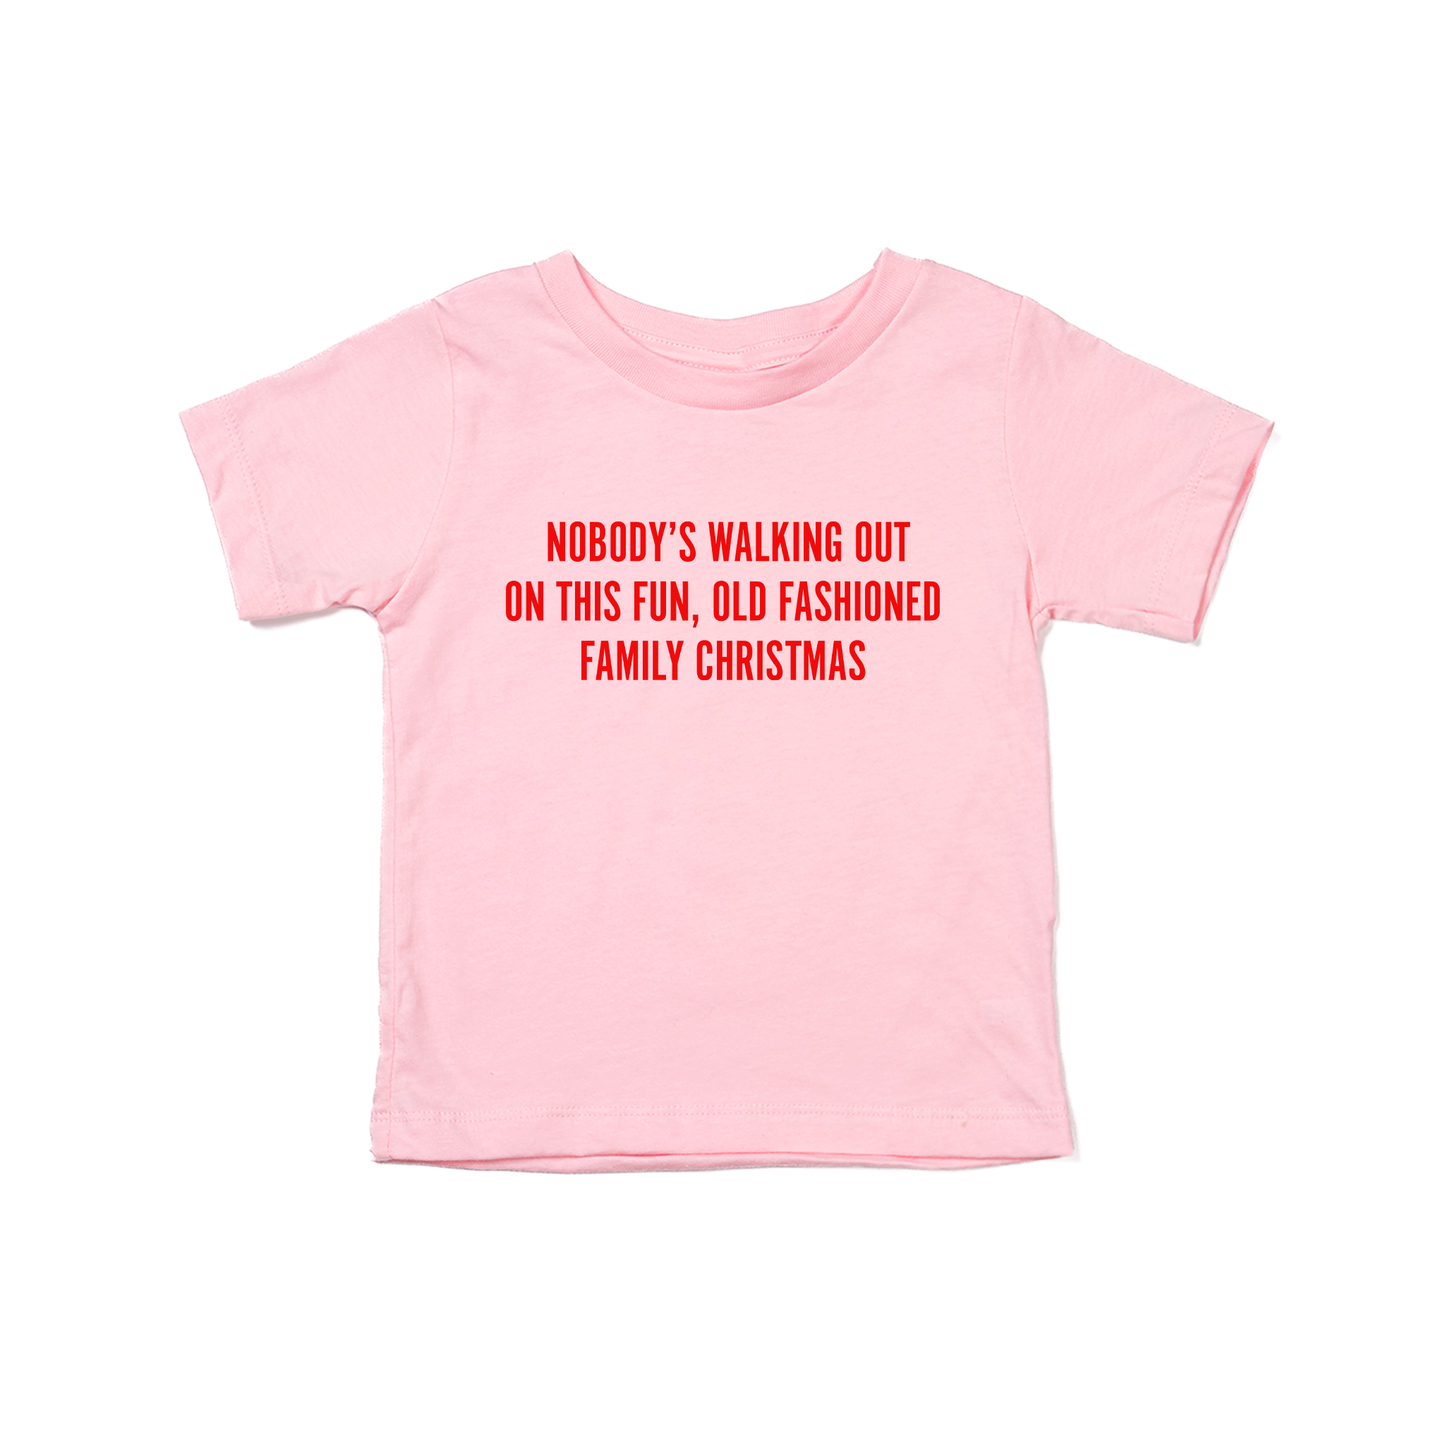 Nobody's walking out on this fun old fashioned family Christmas (Red) - Kids Tee (Pink)